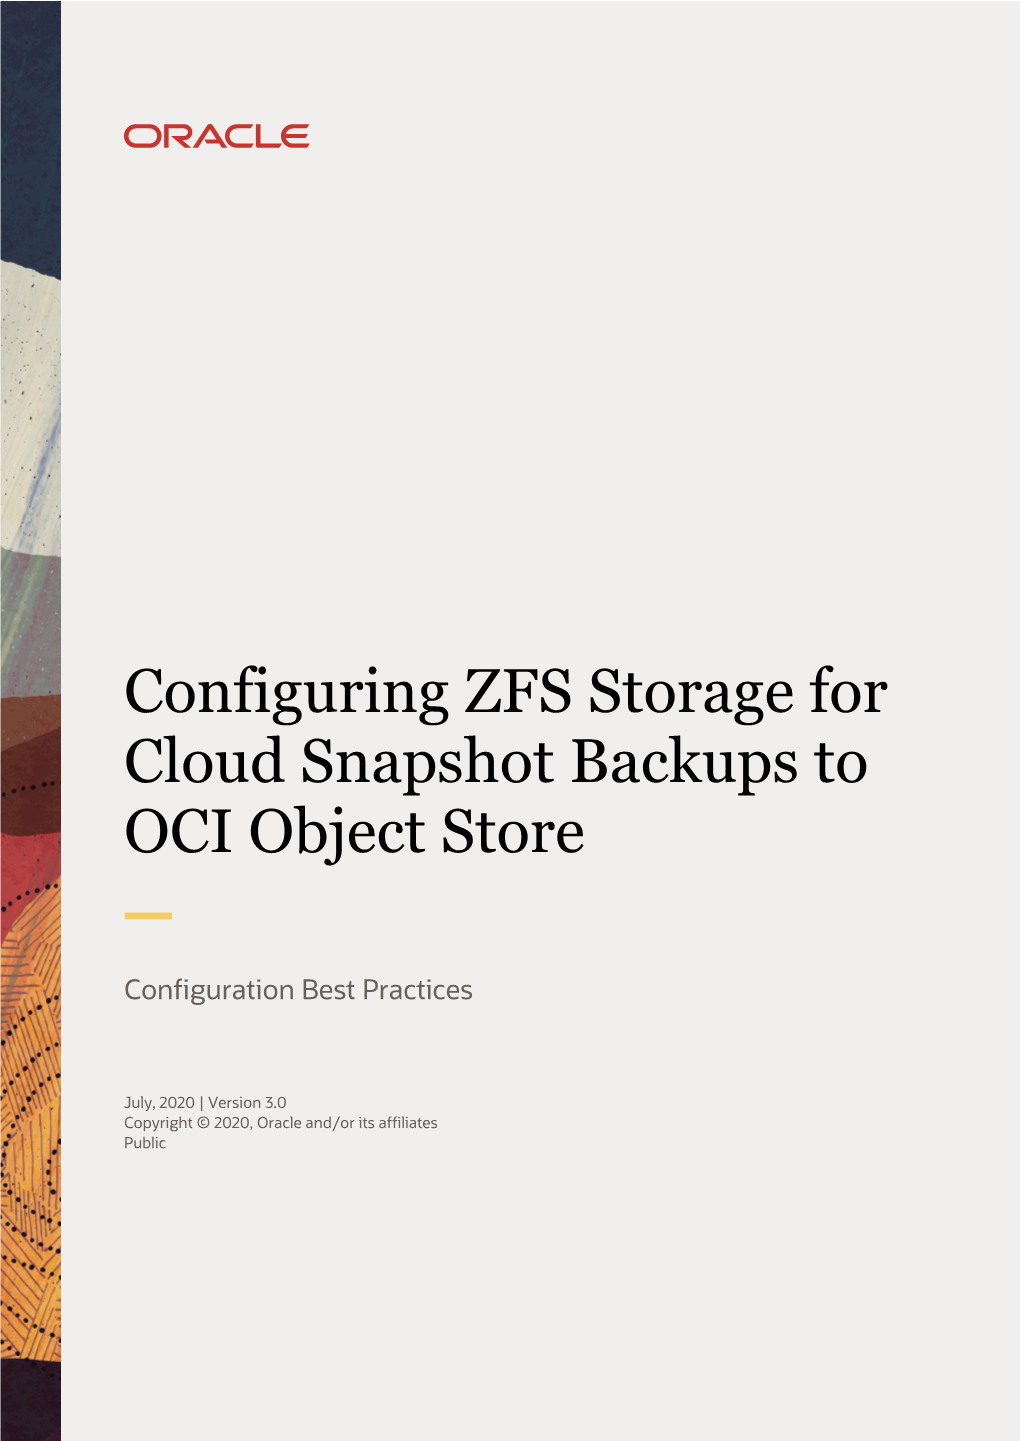 Configuring ZFS Storage for Cloud Snapshot Backups to OCI Object Store